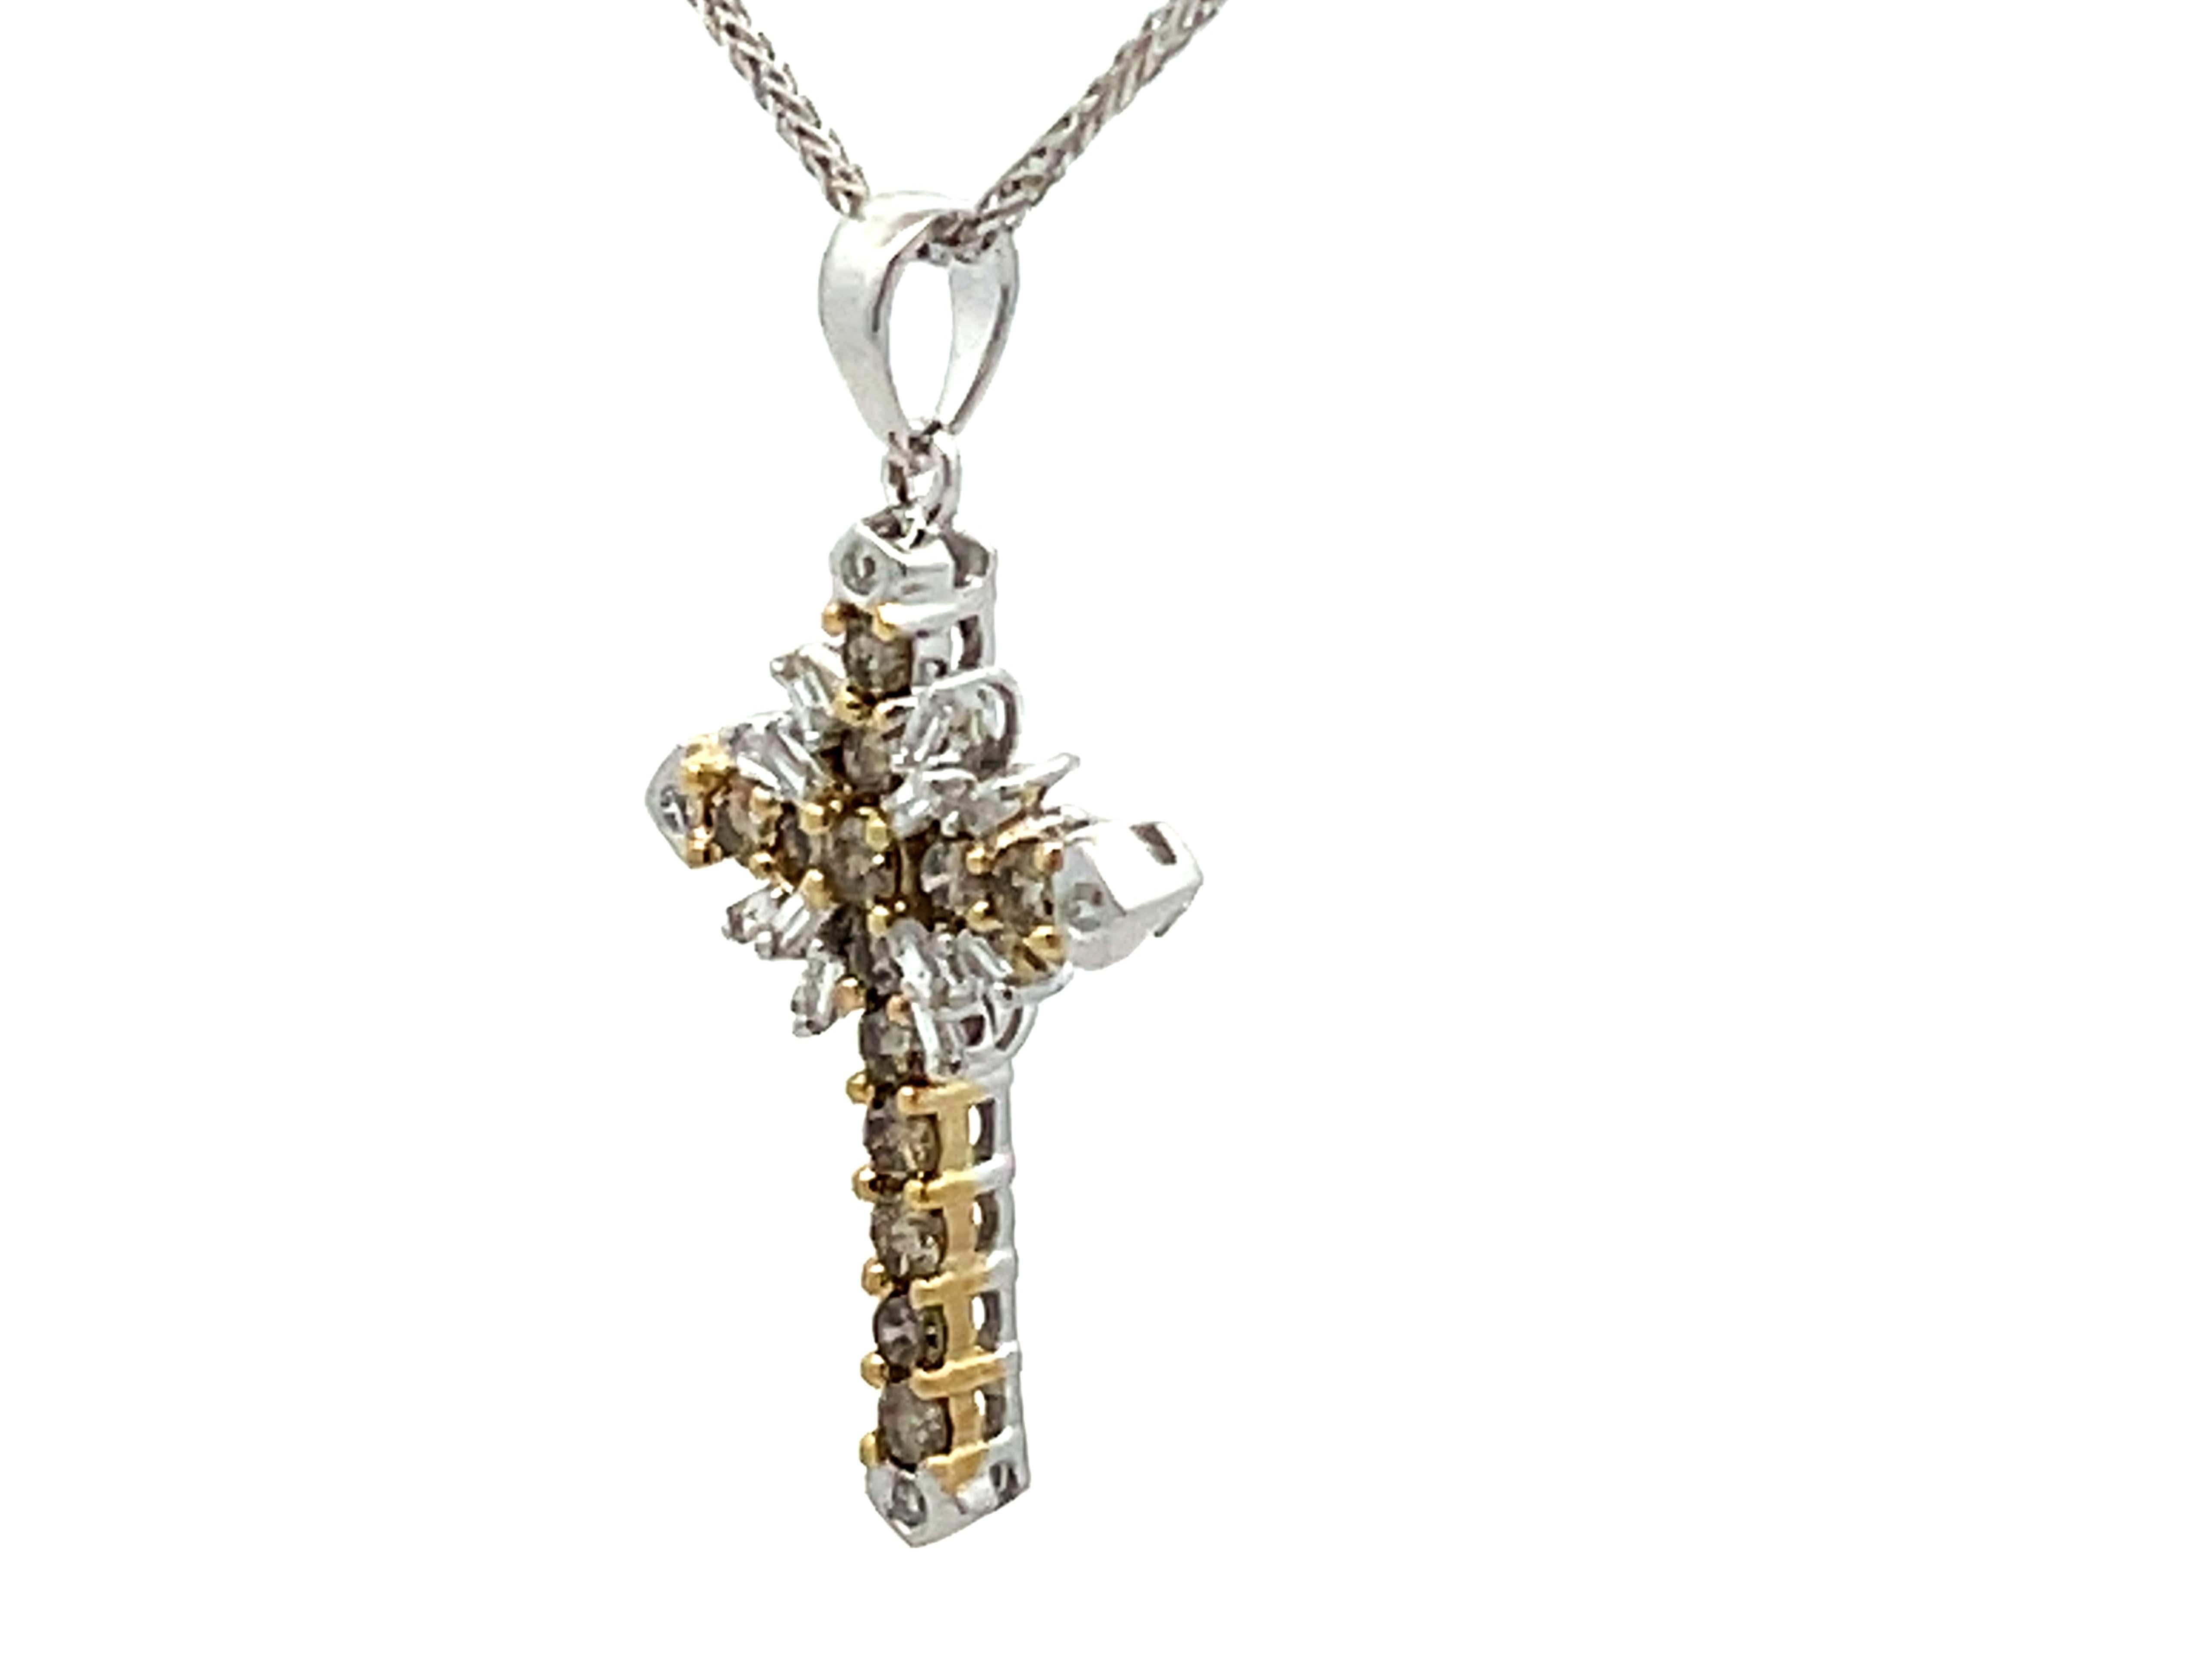 Champagne Diamond Cross Necklace 14k White Gold In Excellent Condition For Sale In Honolulu, HI